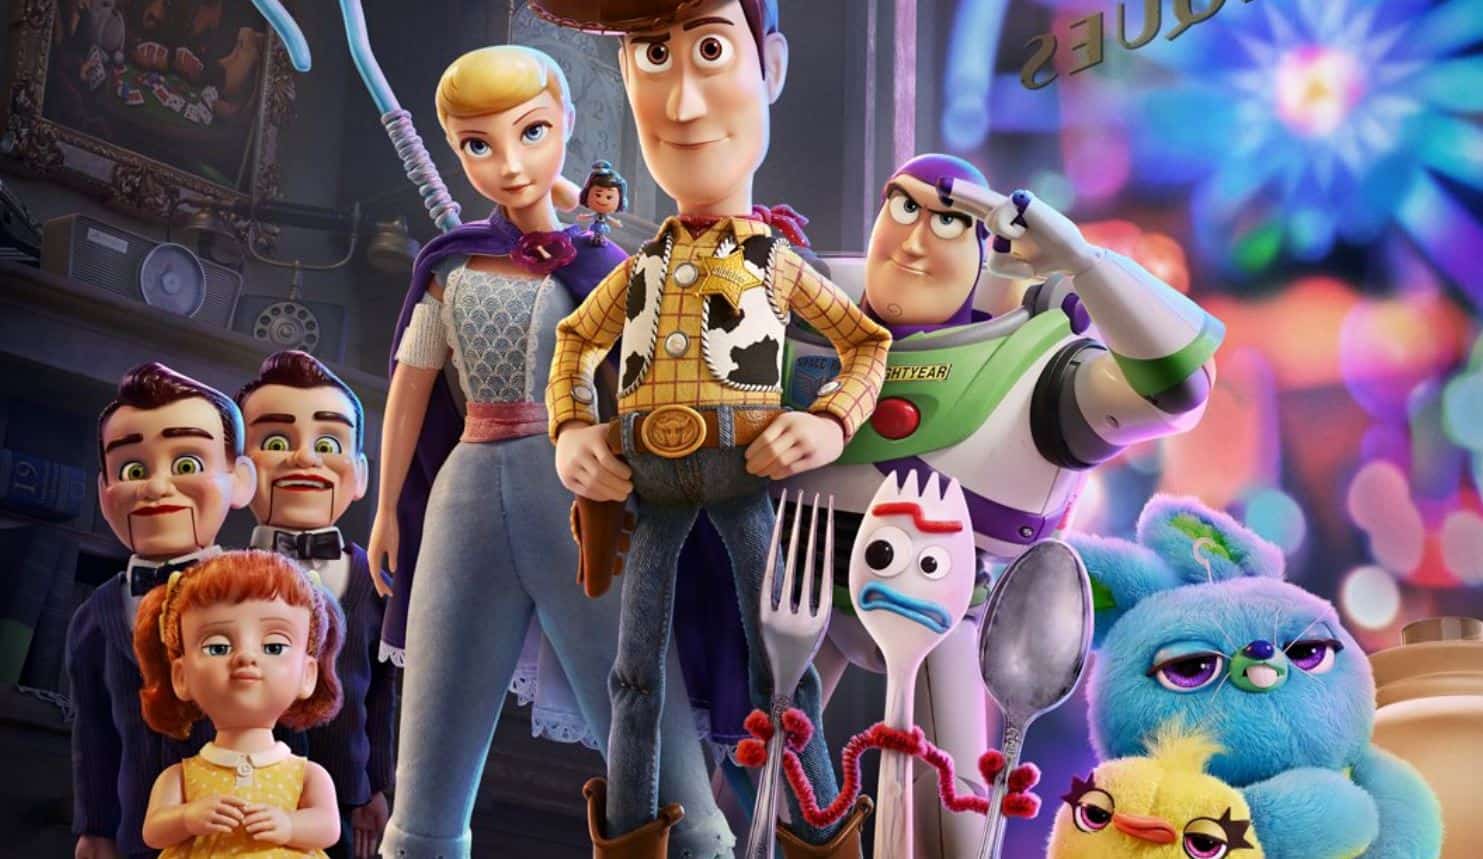 Toy Story 4: Welcome epilogue to Pixar’s legendary trilogy